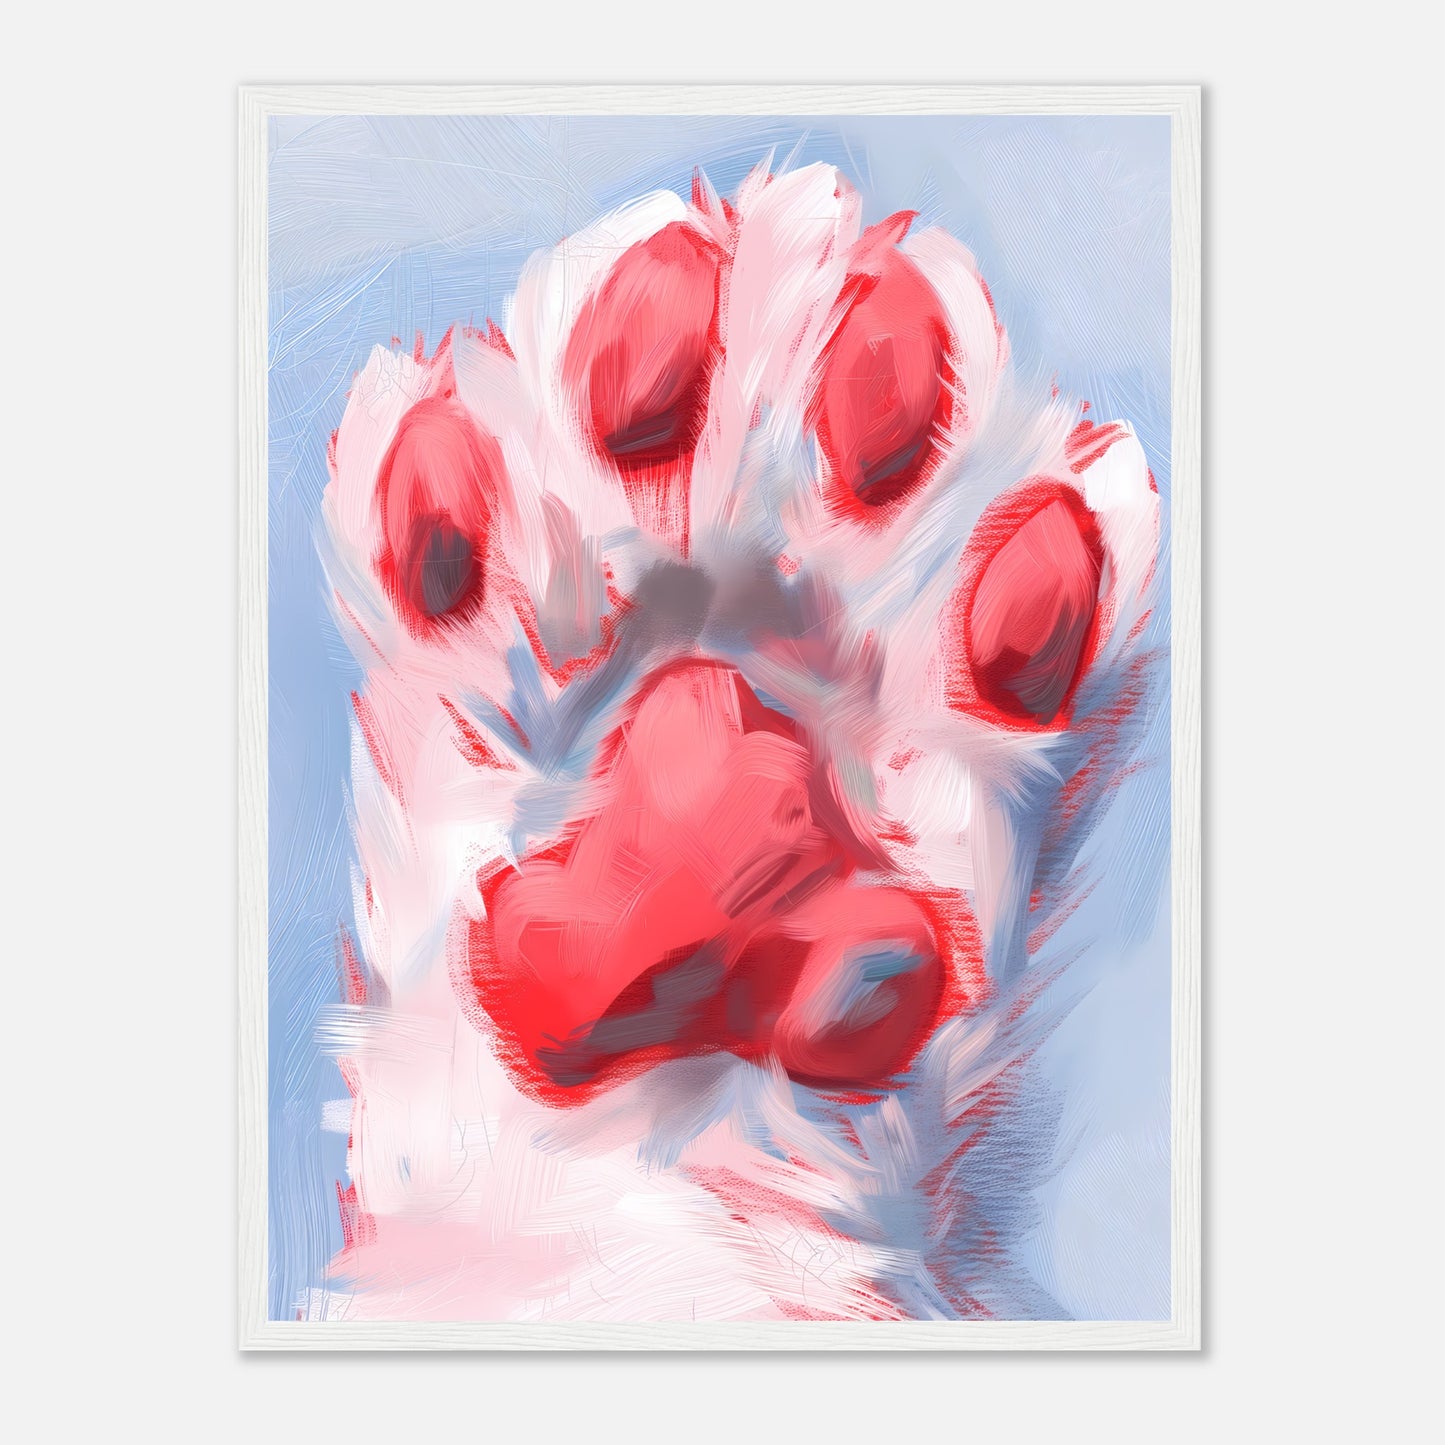 A framed abstract painting of a cat's paw in red and white tones.